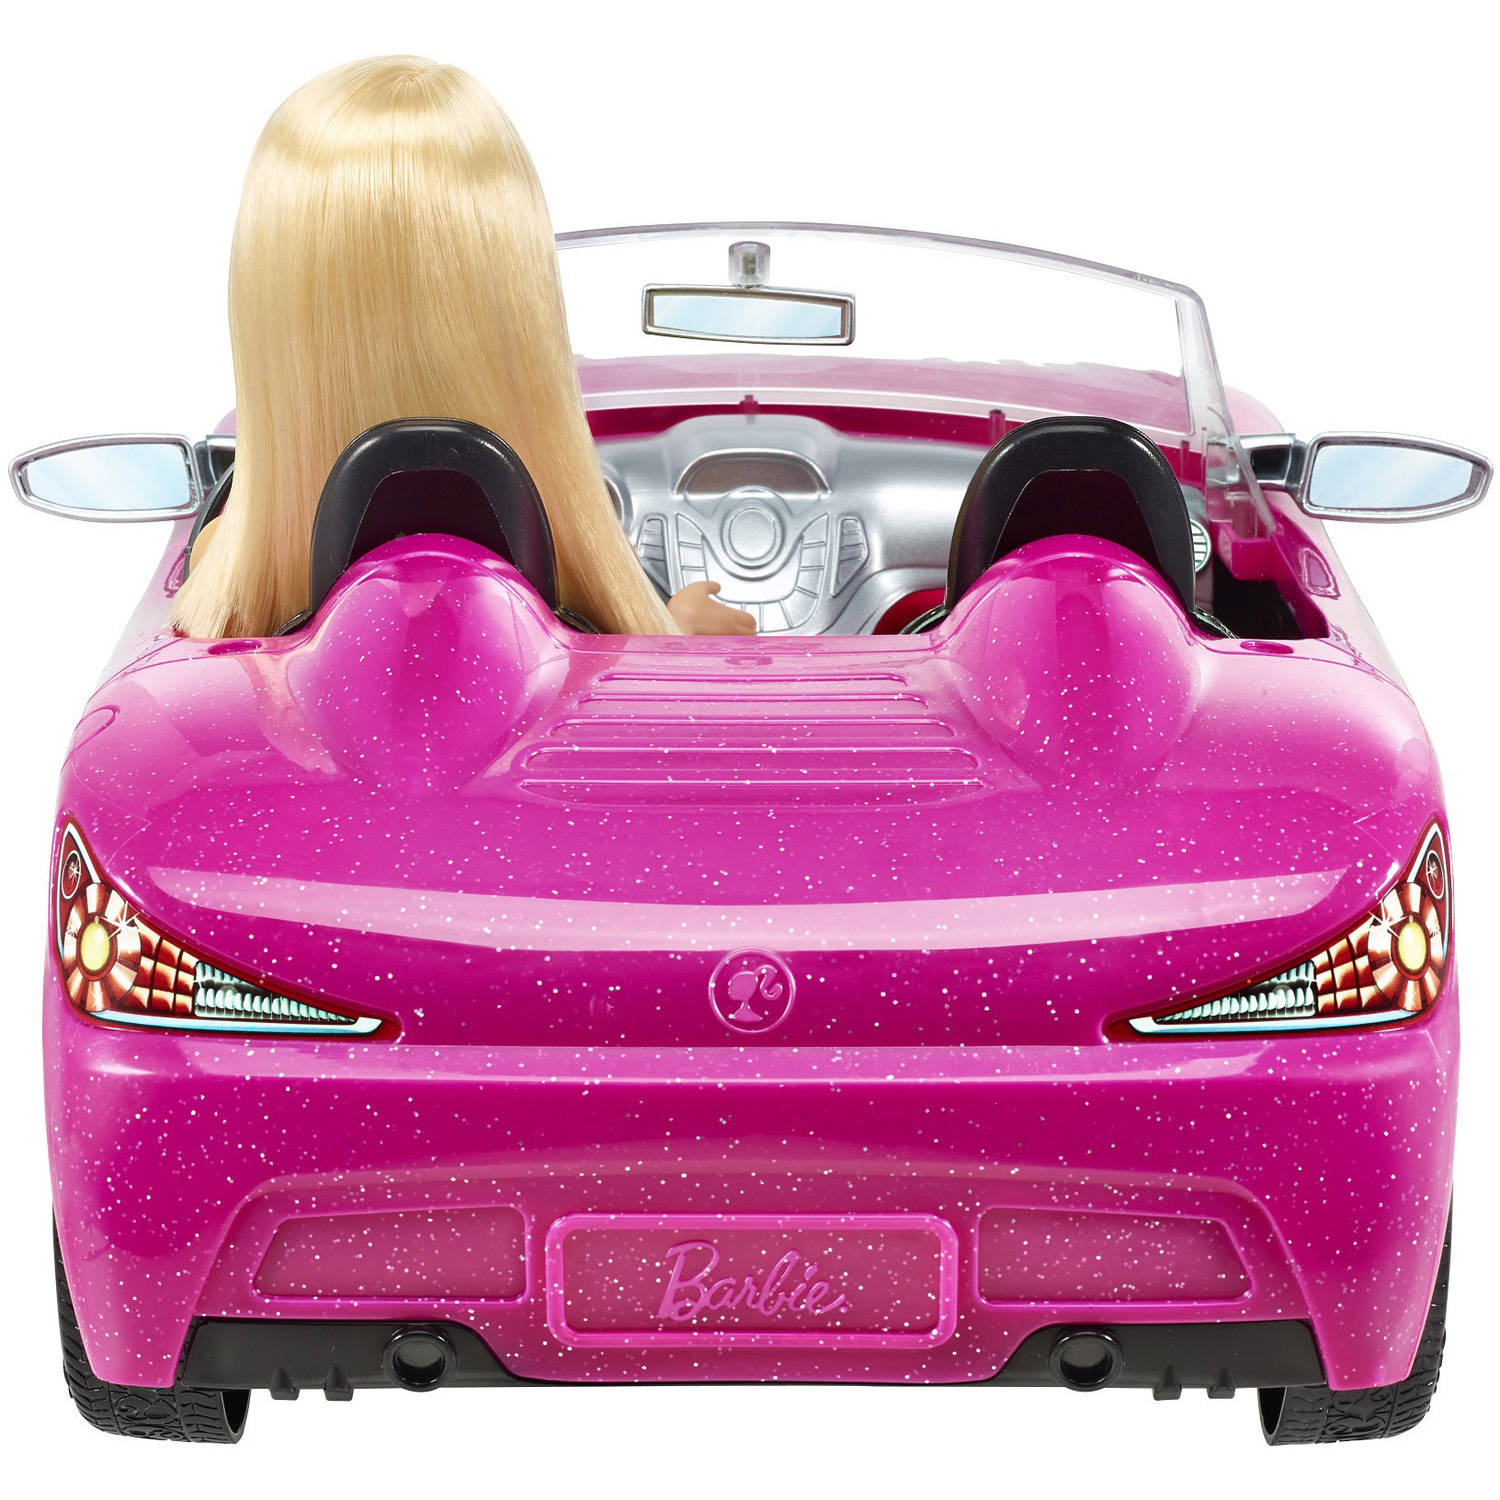 Barbie Glam Convertible, Pink - image 5 of 9